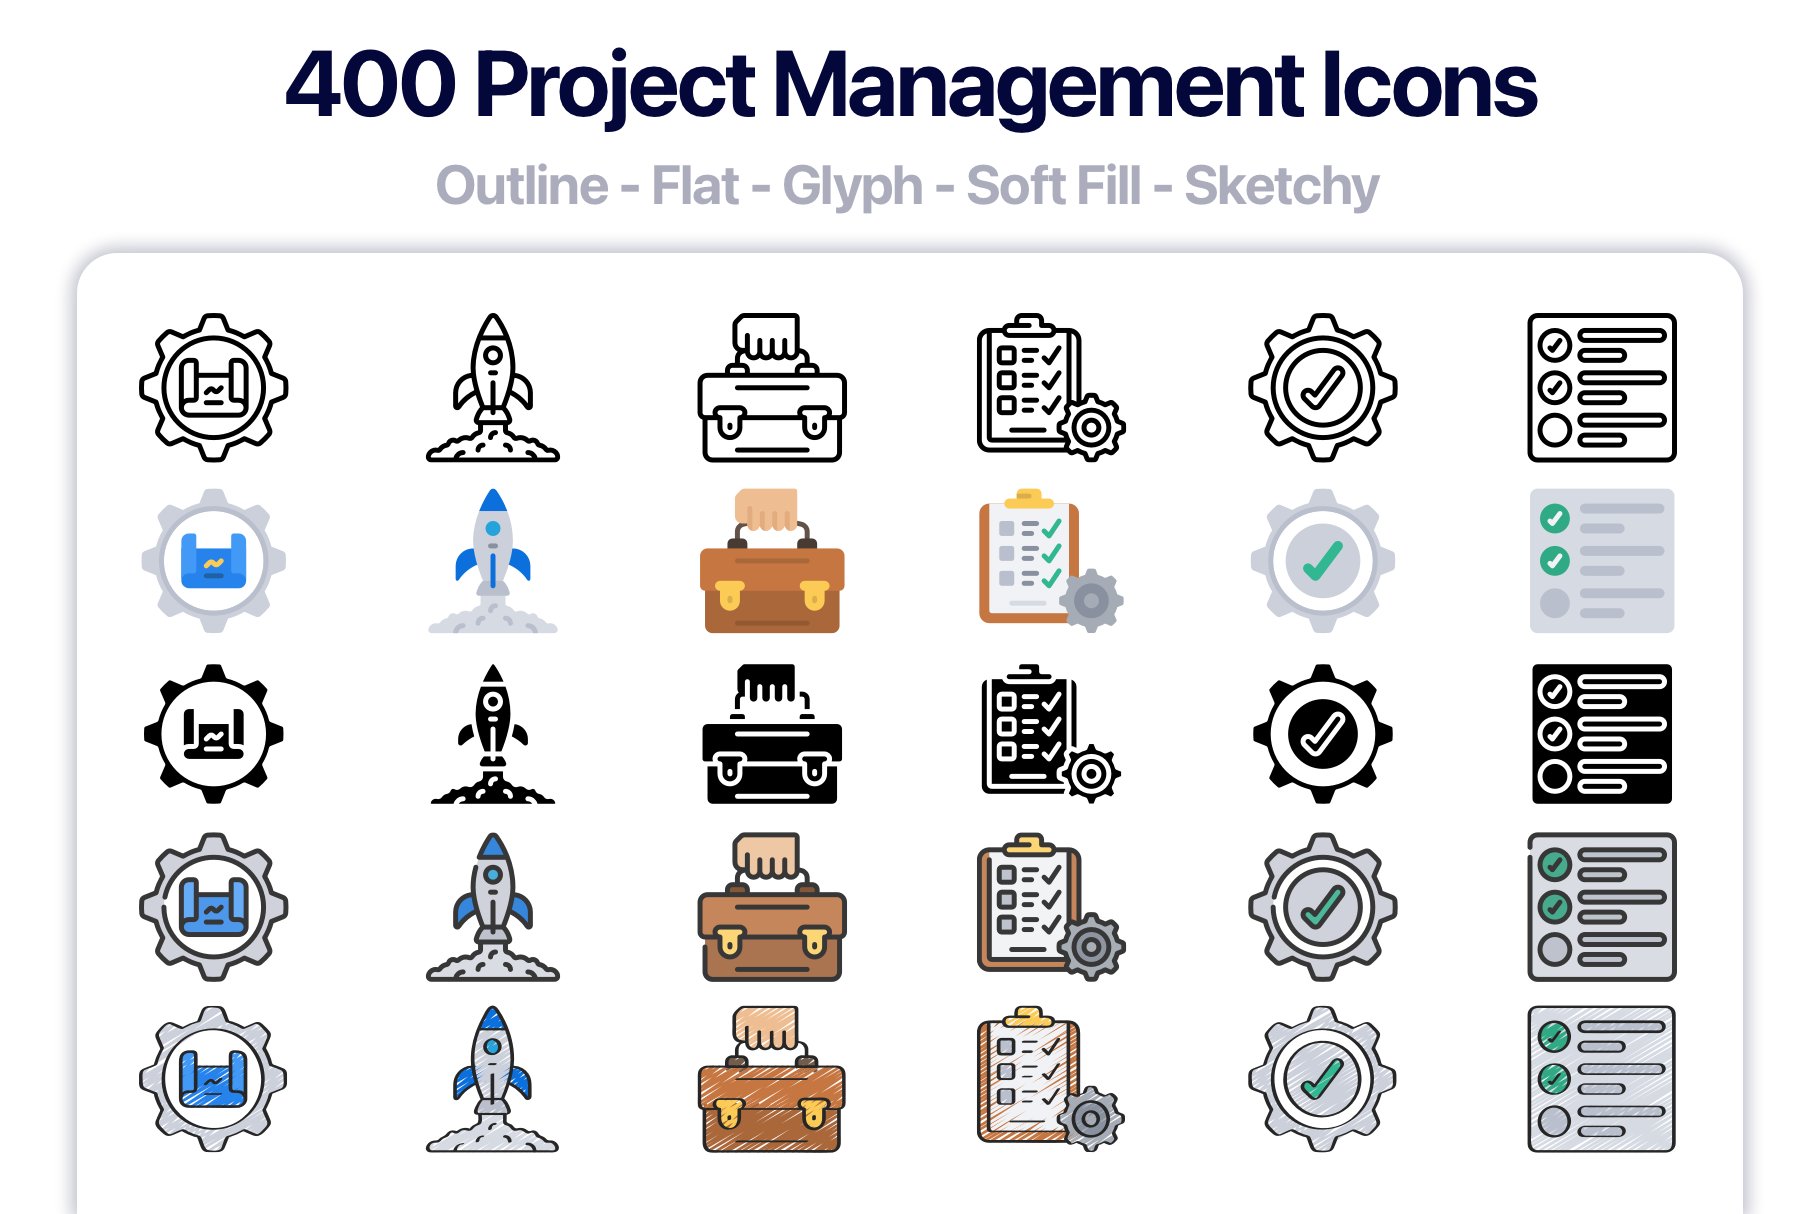 400 project management icons.